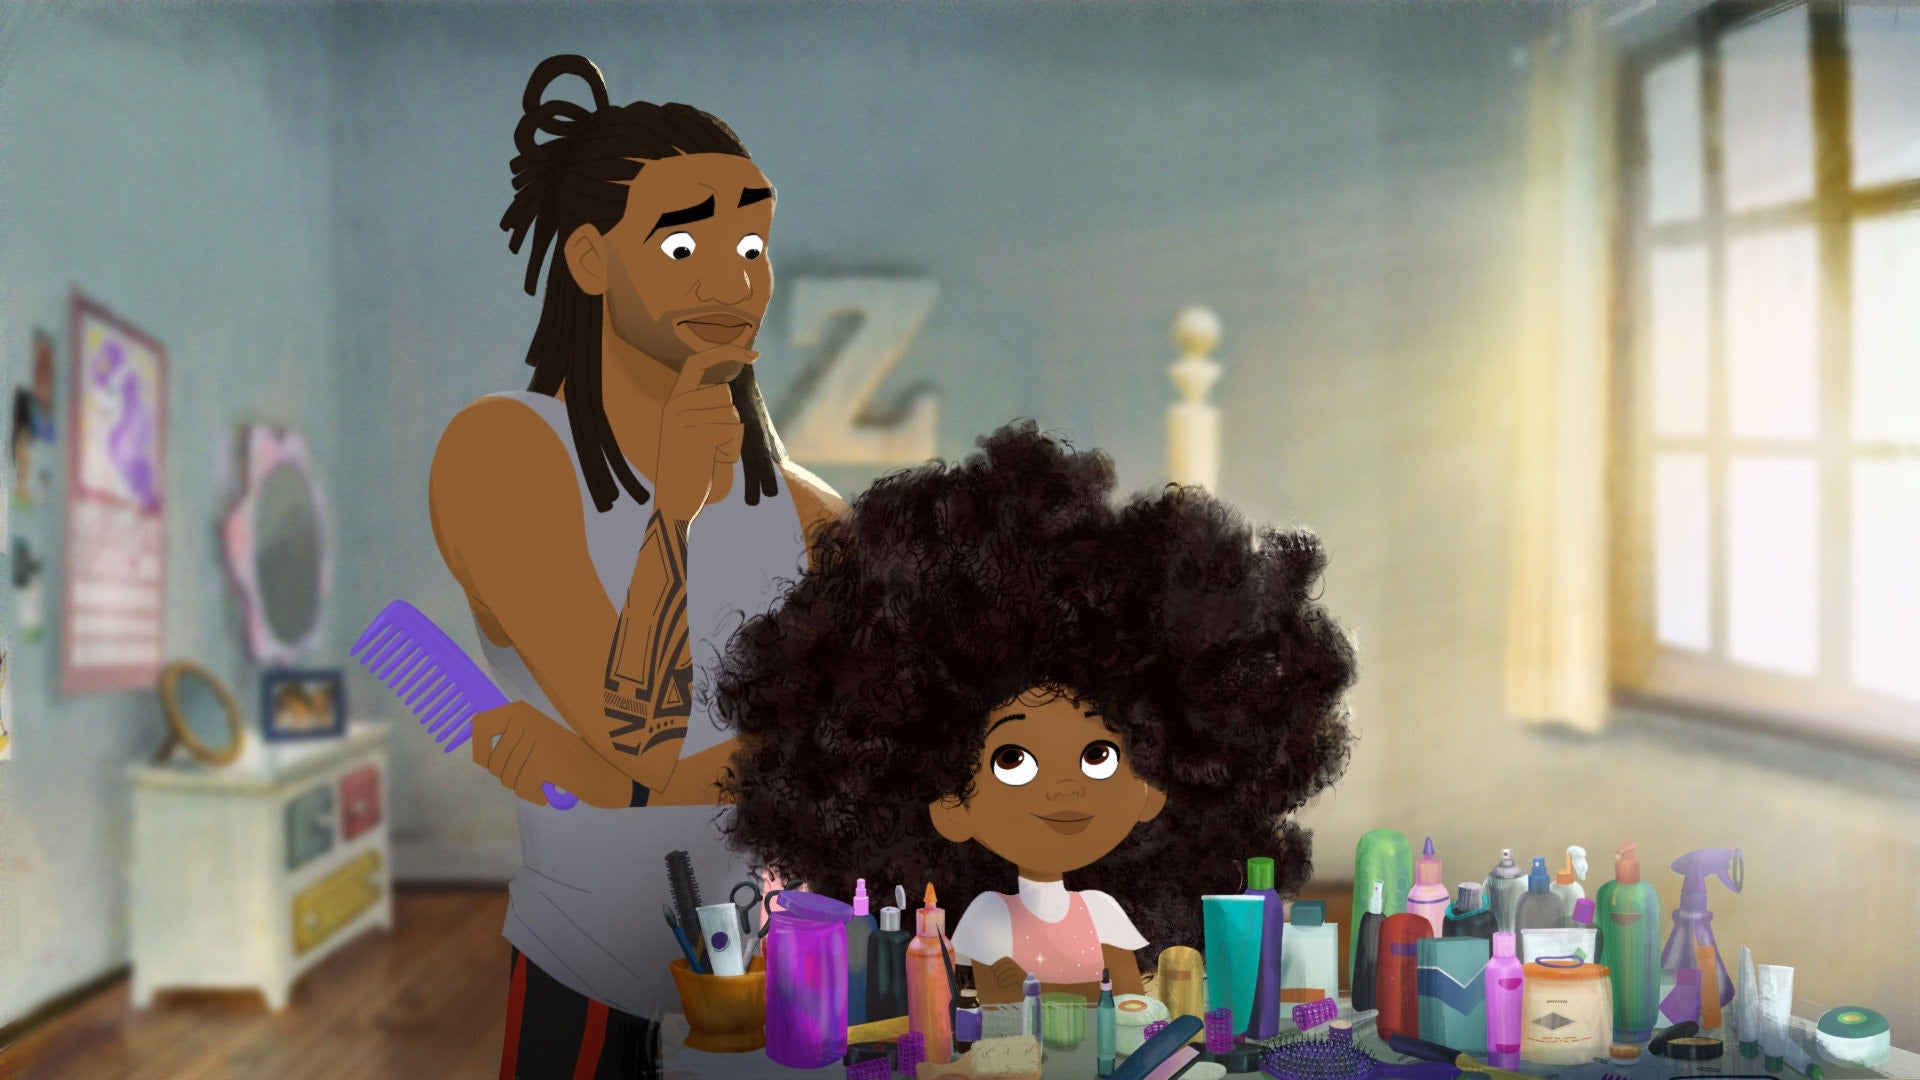 MUST WATCH: This Ex-NFL Wide Receiver's Short Film 'Hair Love' Will Touch Your Soul